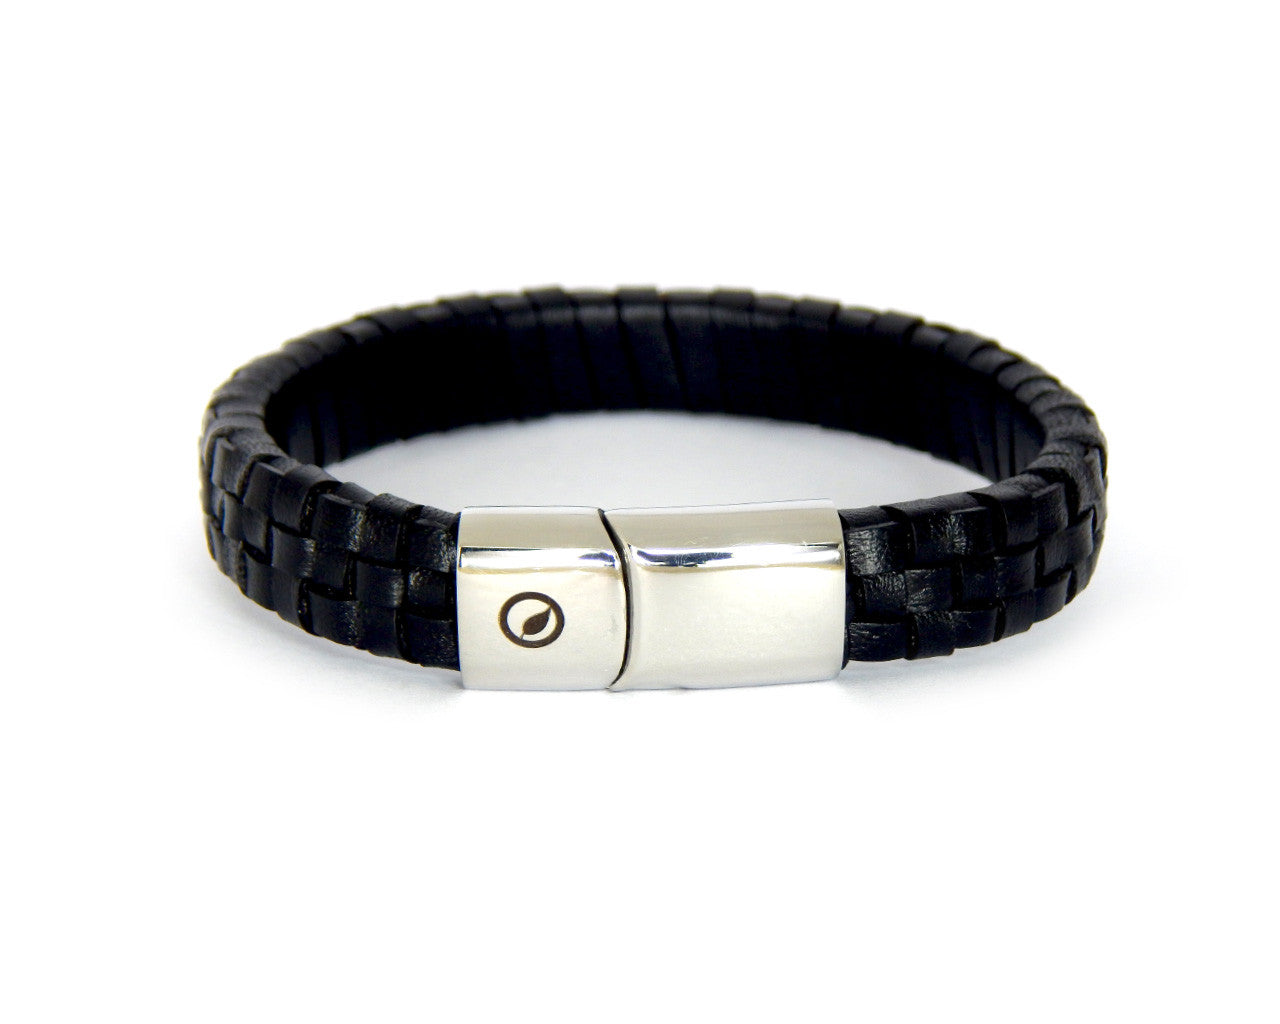 Men's Nappa Leather Bracelet LT-01 - Natural Clothes Bamboo Clothing & Accessories for Men & Women 